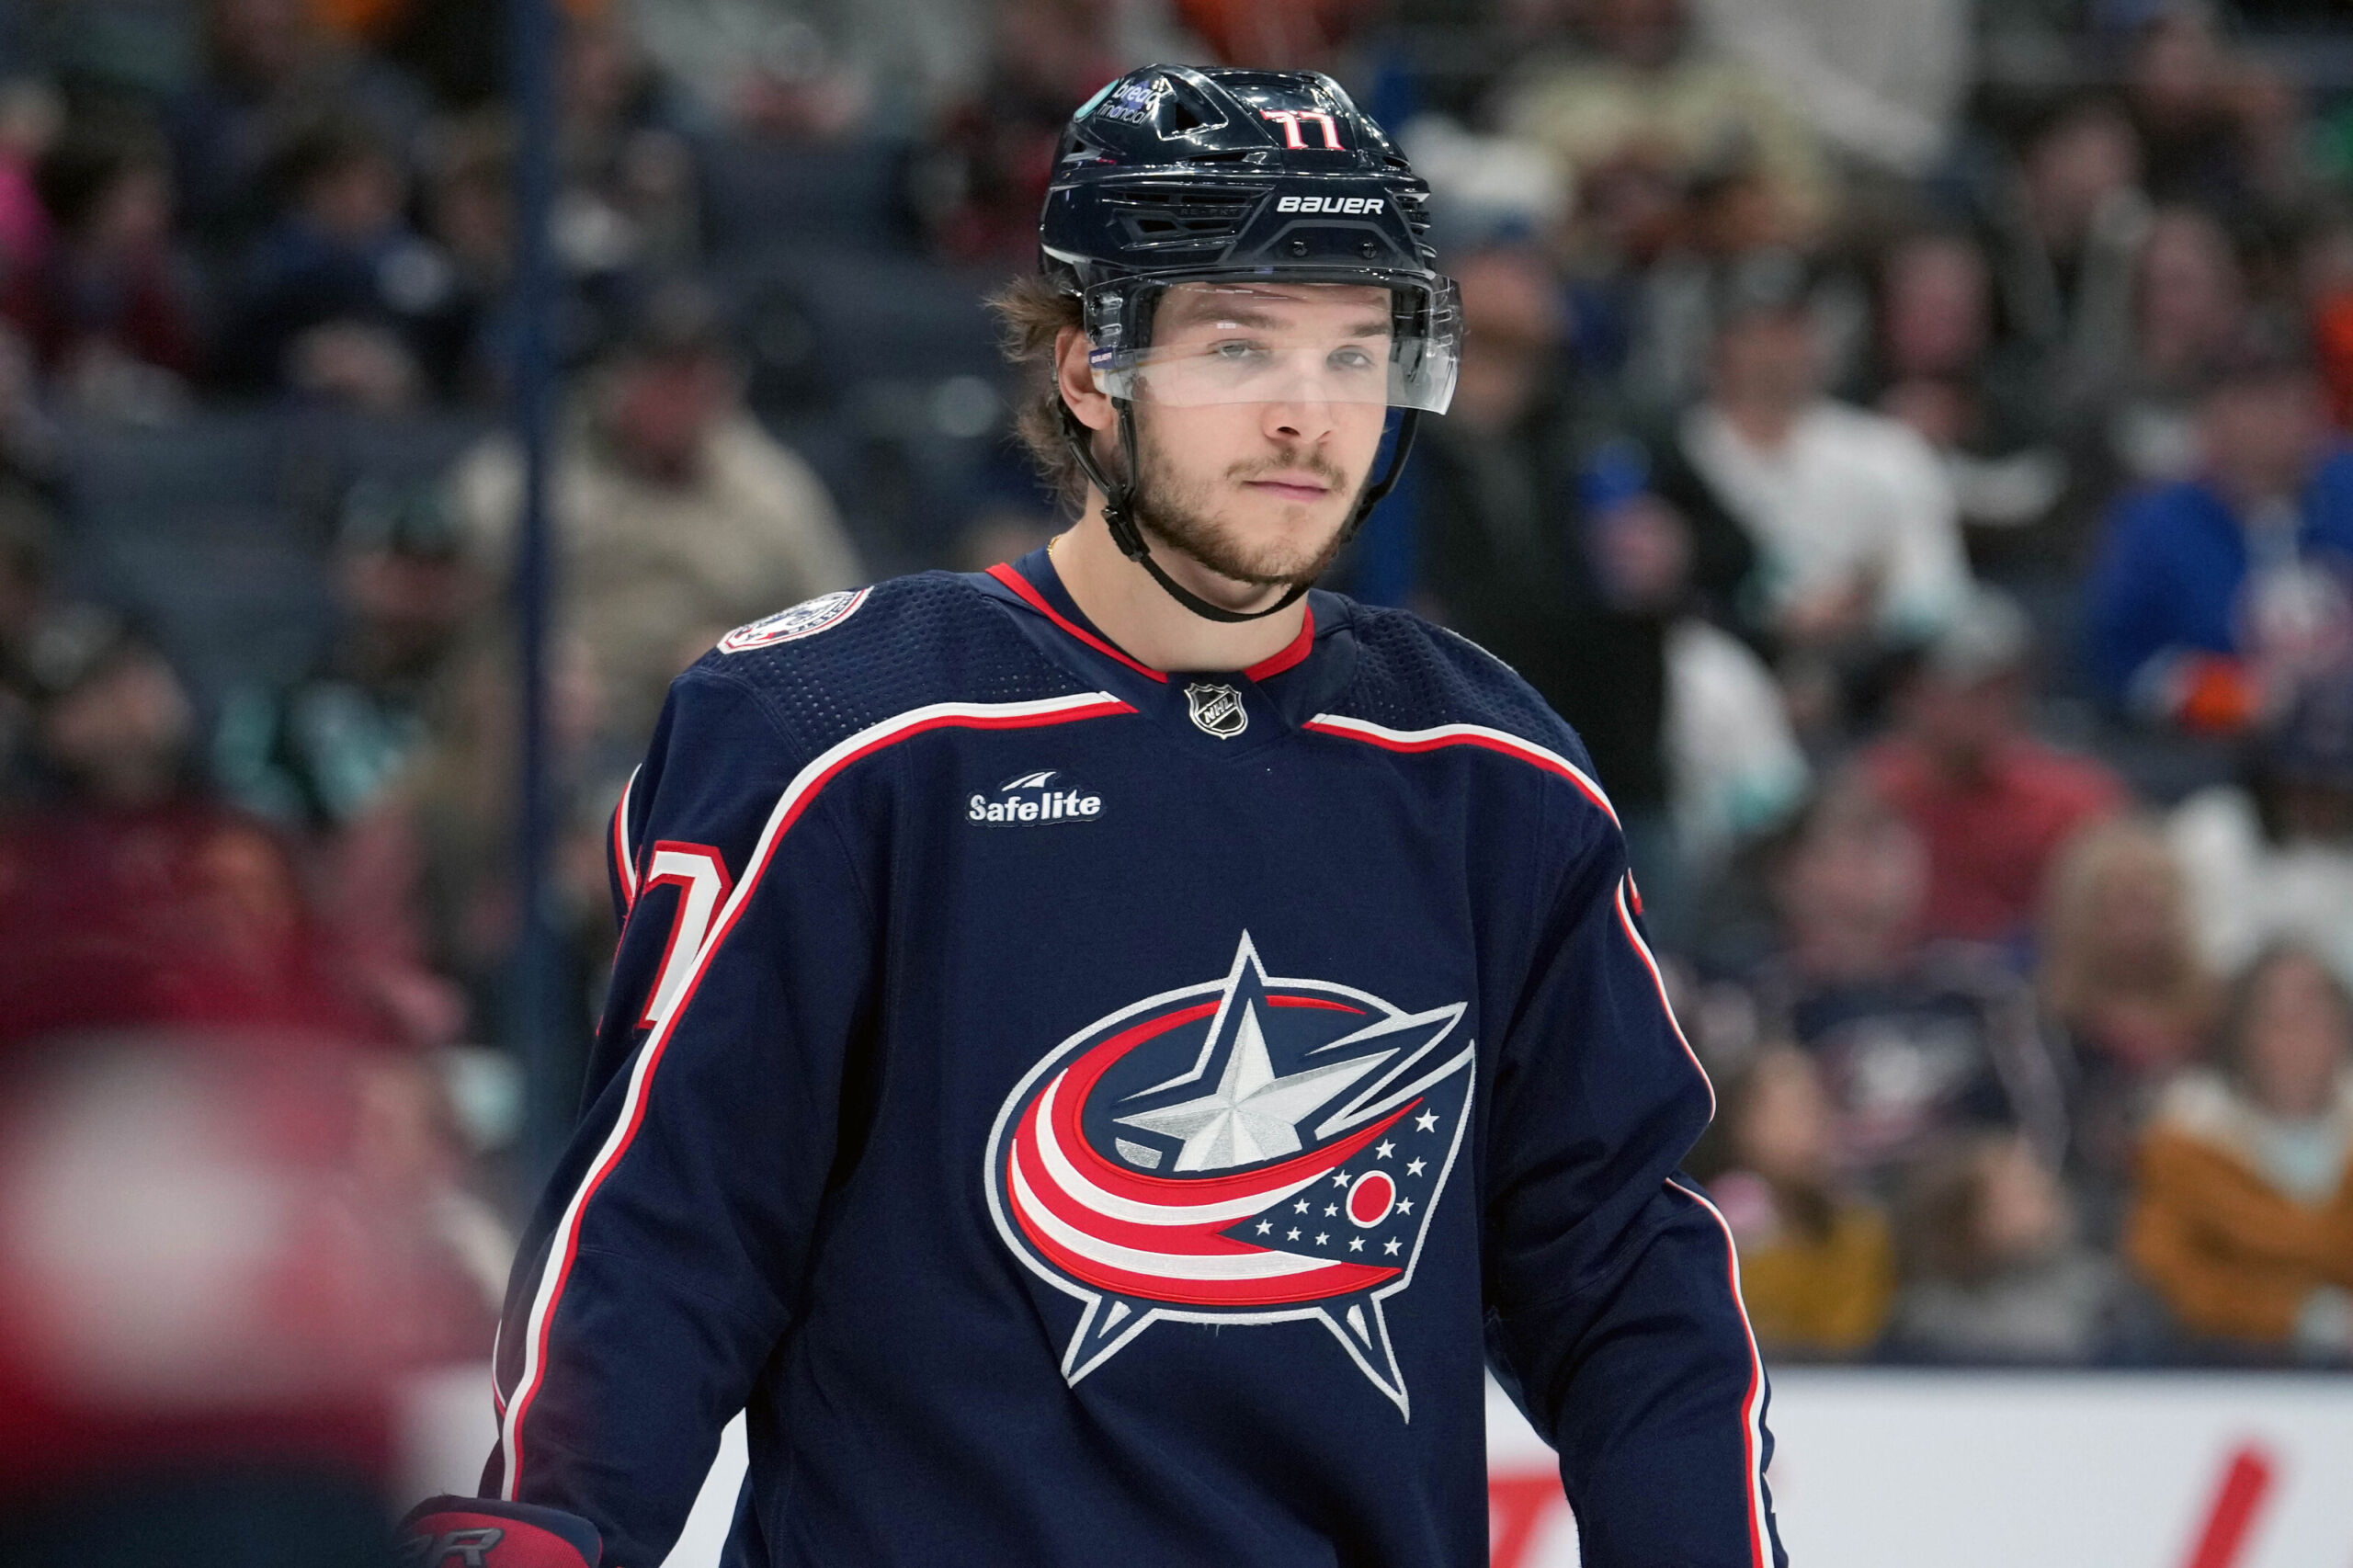 Inside The Box: How the Columbus Blue Jackets can actually keep